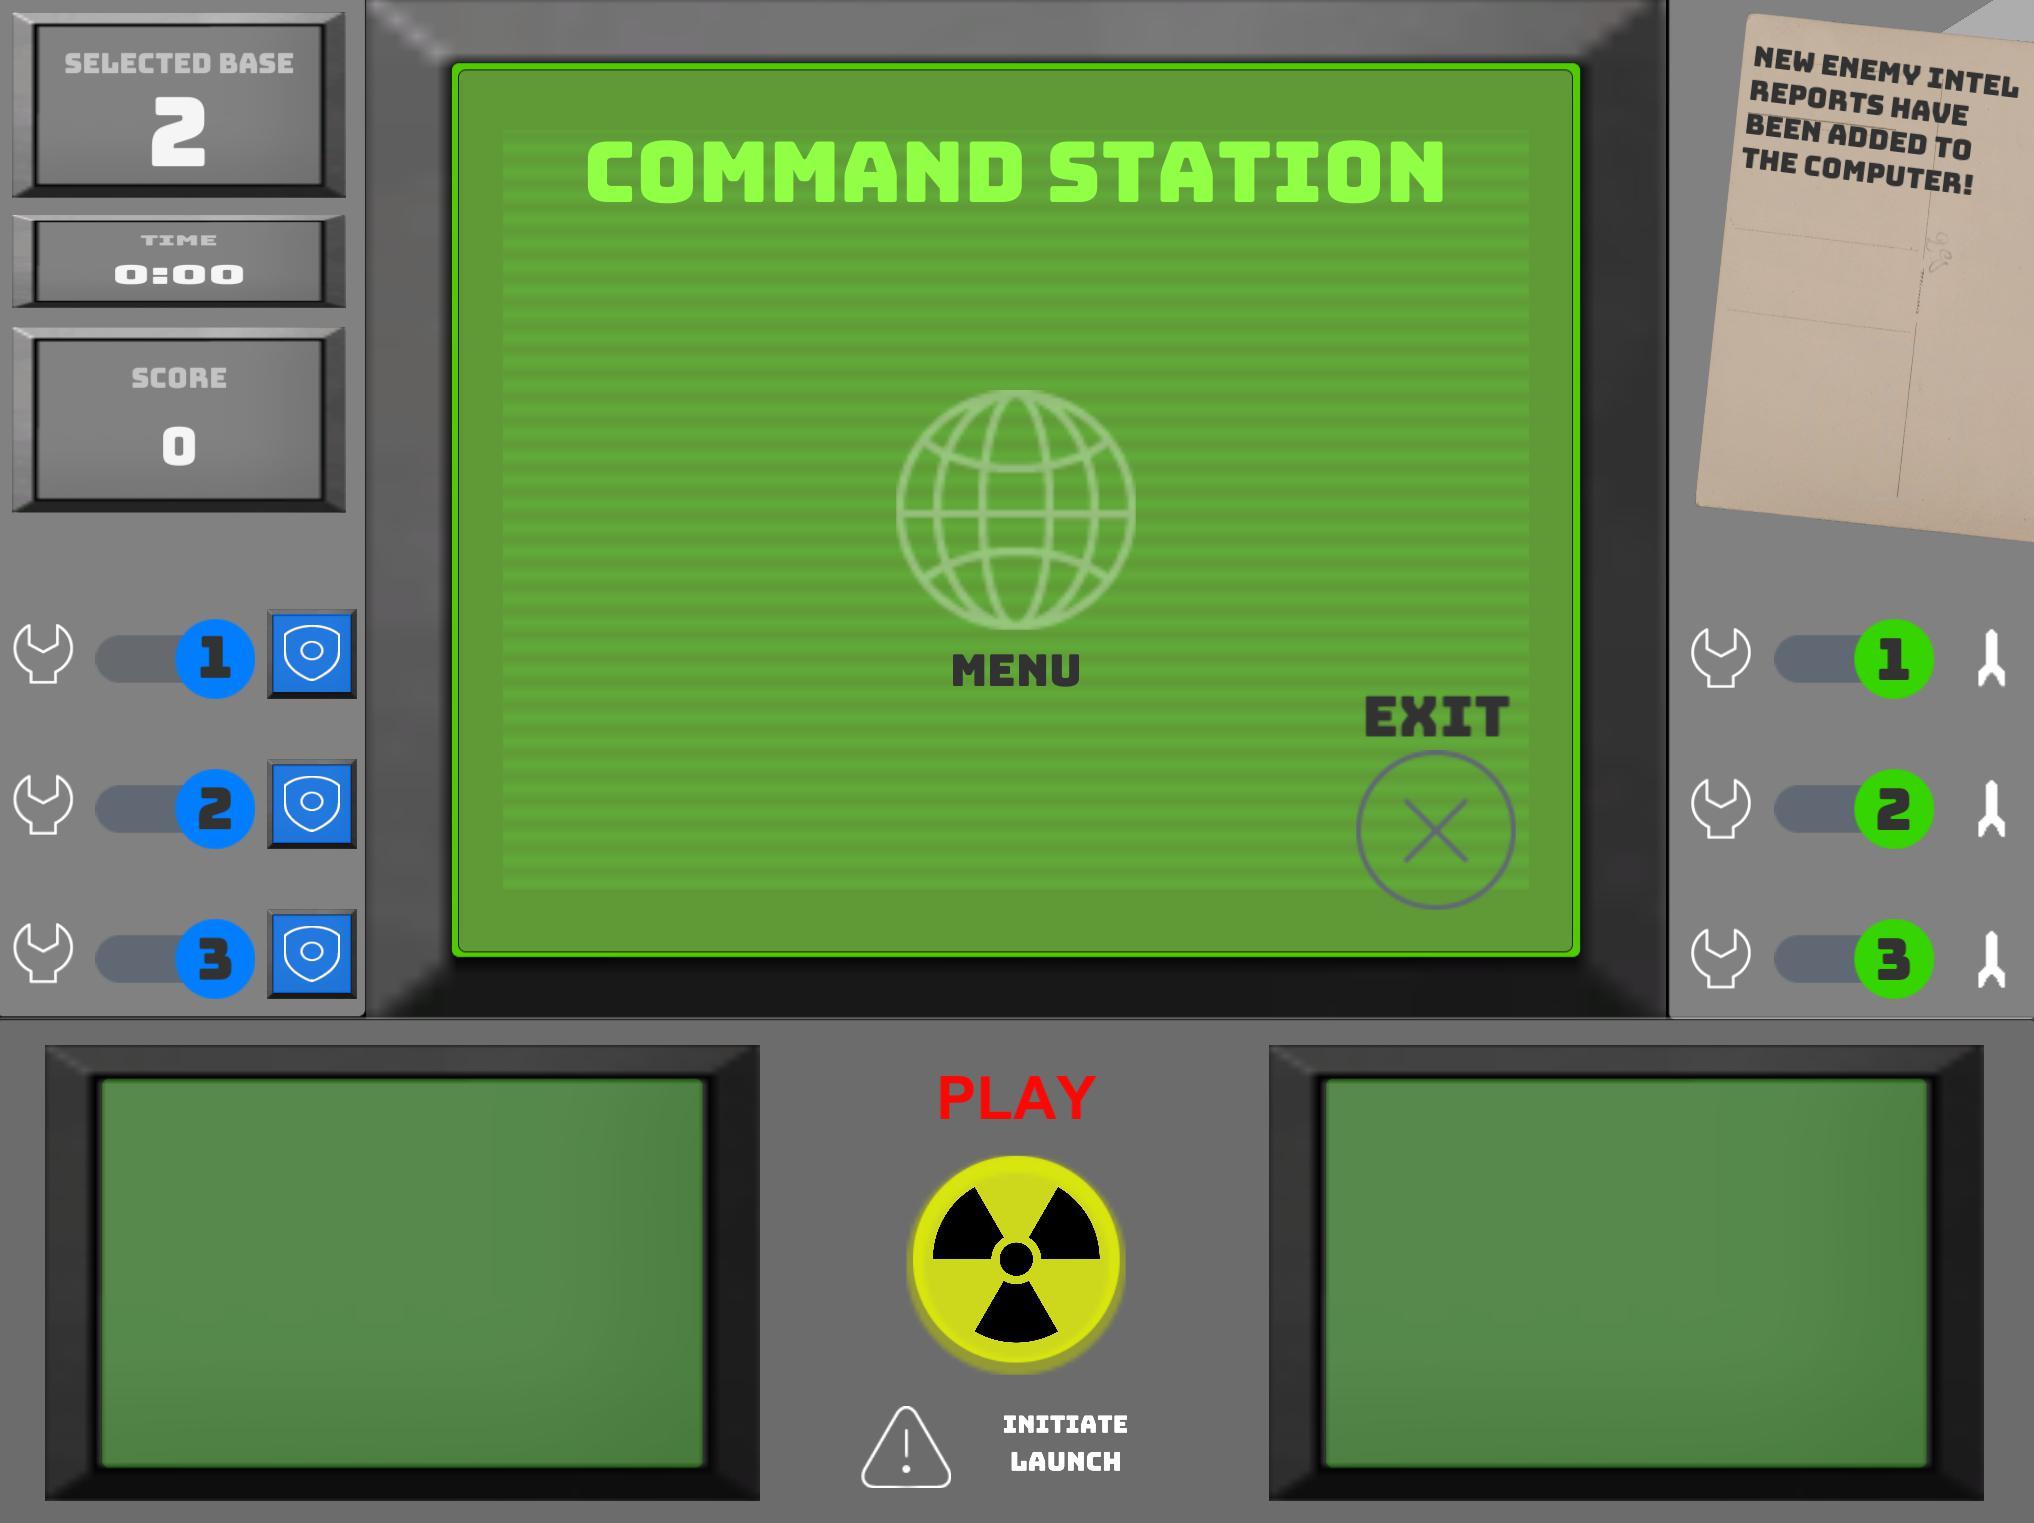 To Command. Real Command игры рингтон. Command Station do 4221. Command Station do 4221 инструкция.